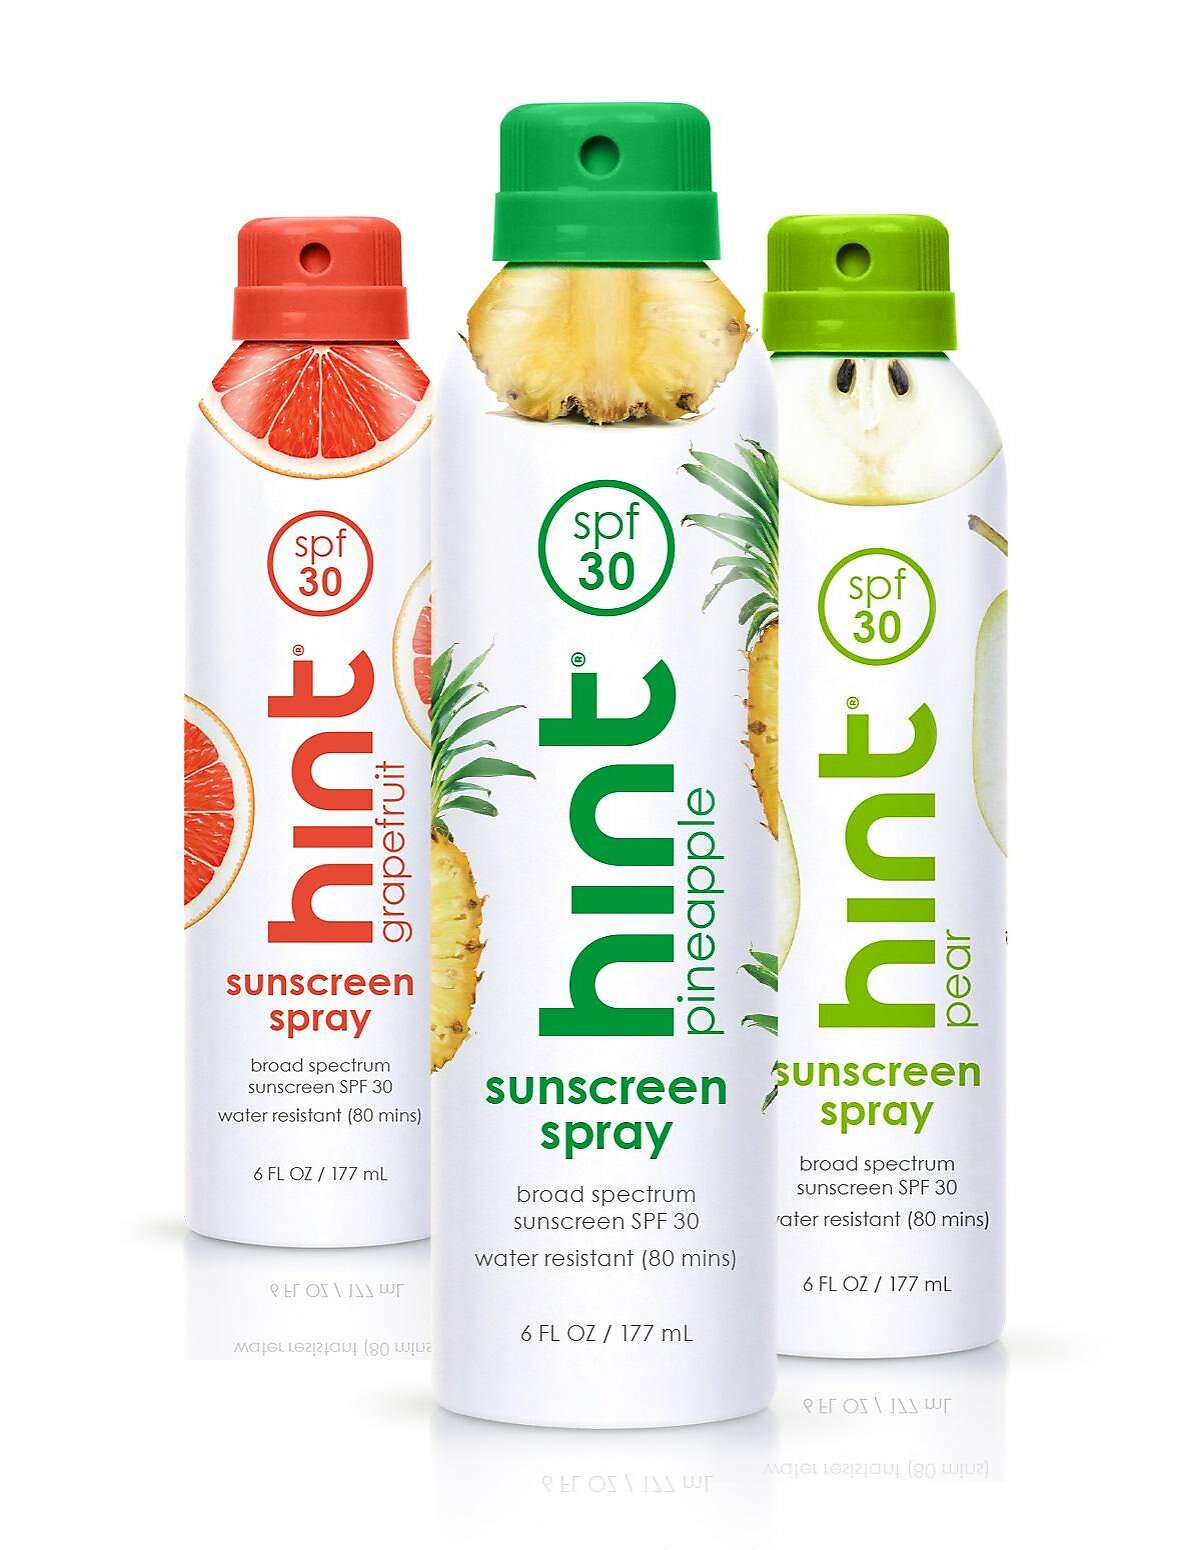 Hint Sunscreen Spray, an SPF 30, water-resistant mist that incorporates moisturizing aloe vera juice and other natural ingredients.